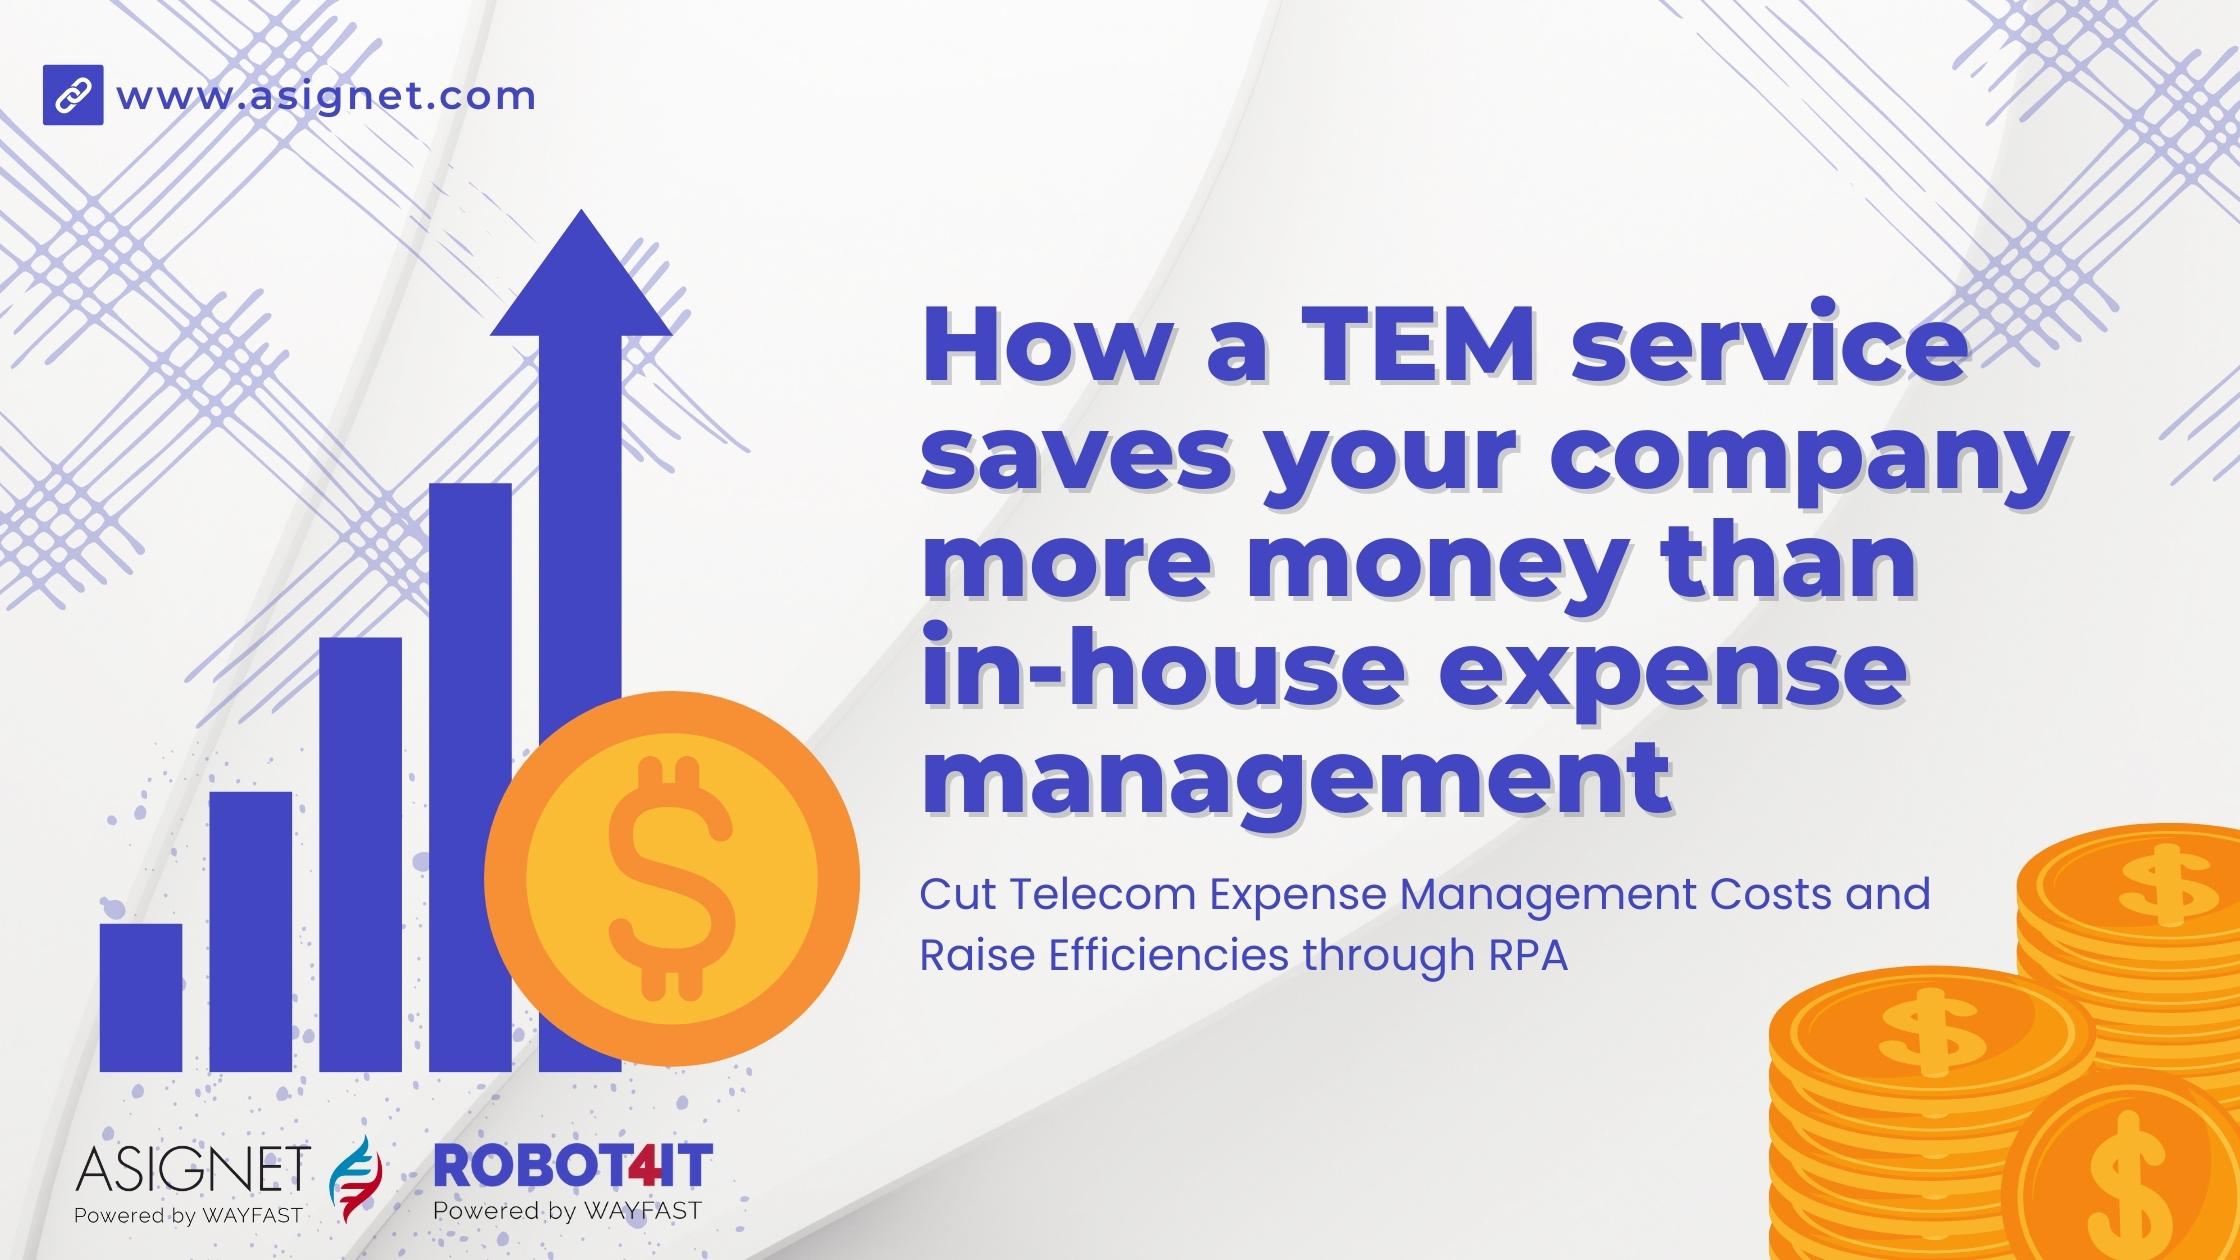 How a TEM service saves your company more money than in-house expense management. Cut Telecom Expense Management Costs and Raise Efficiencies through RPA.